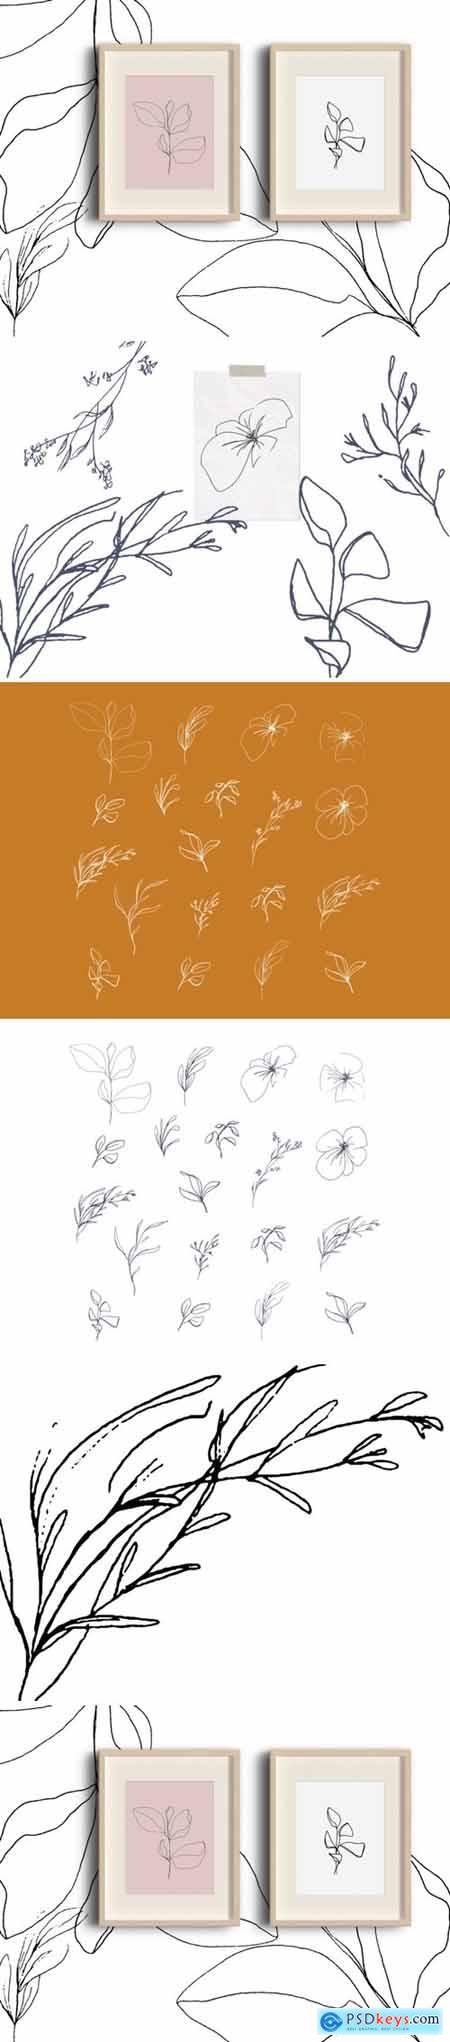 Floral pencil drawing one line art elements, Vector